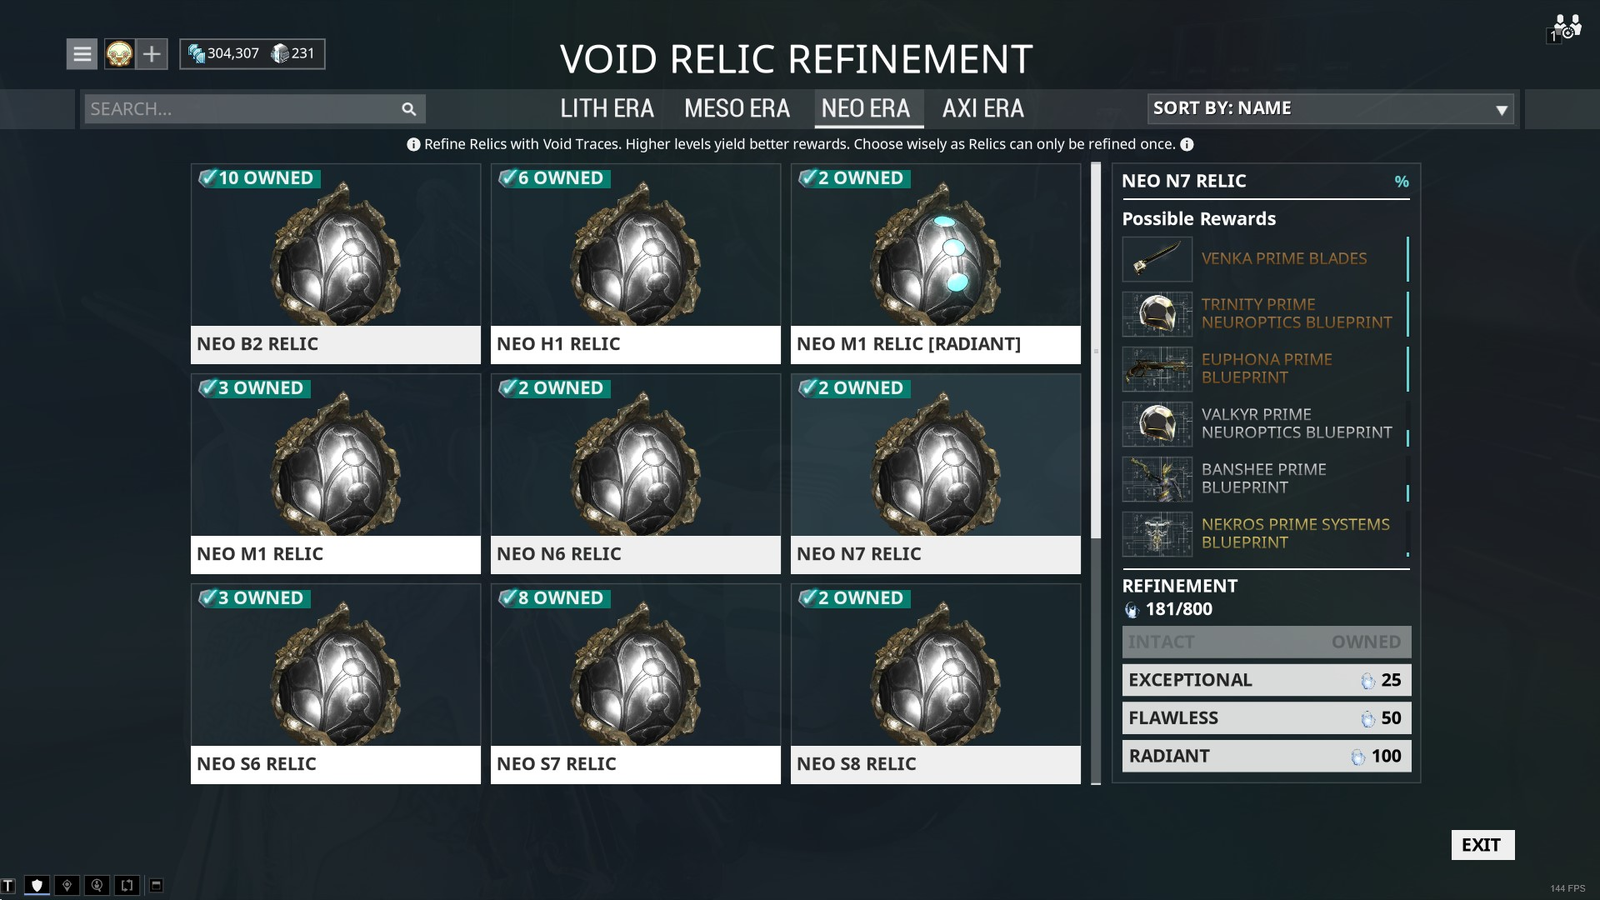 Tutorial: How to claim the Void Bundle from  Prime Gaming